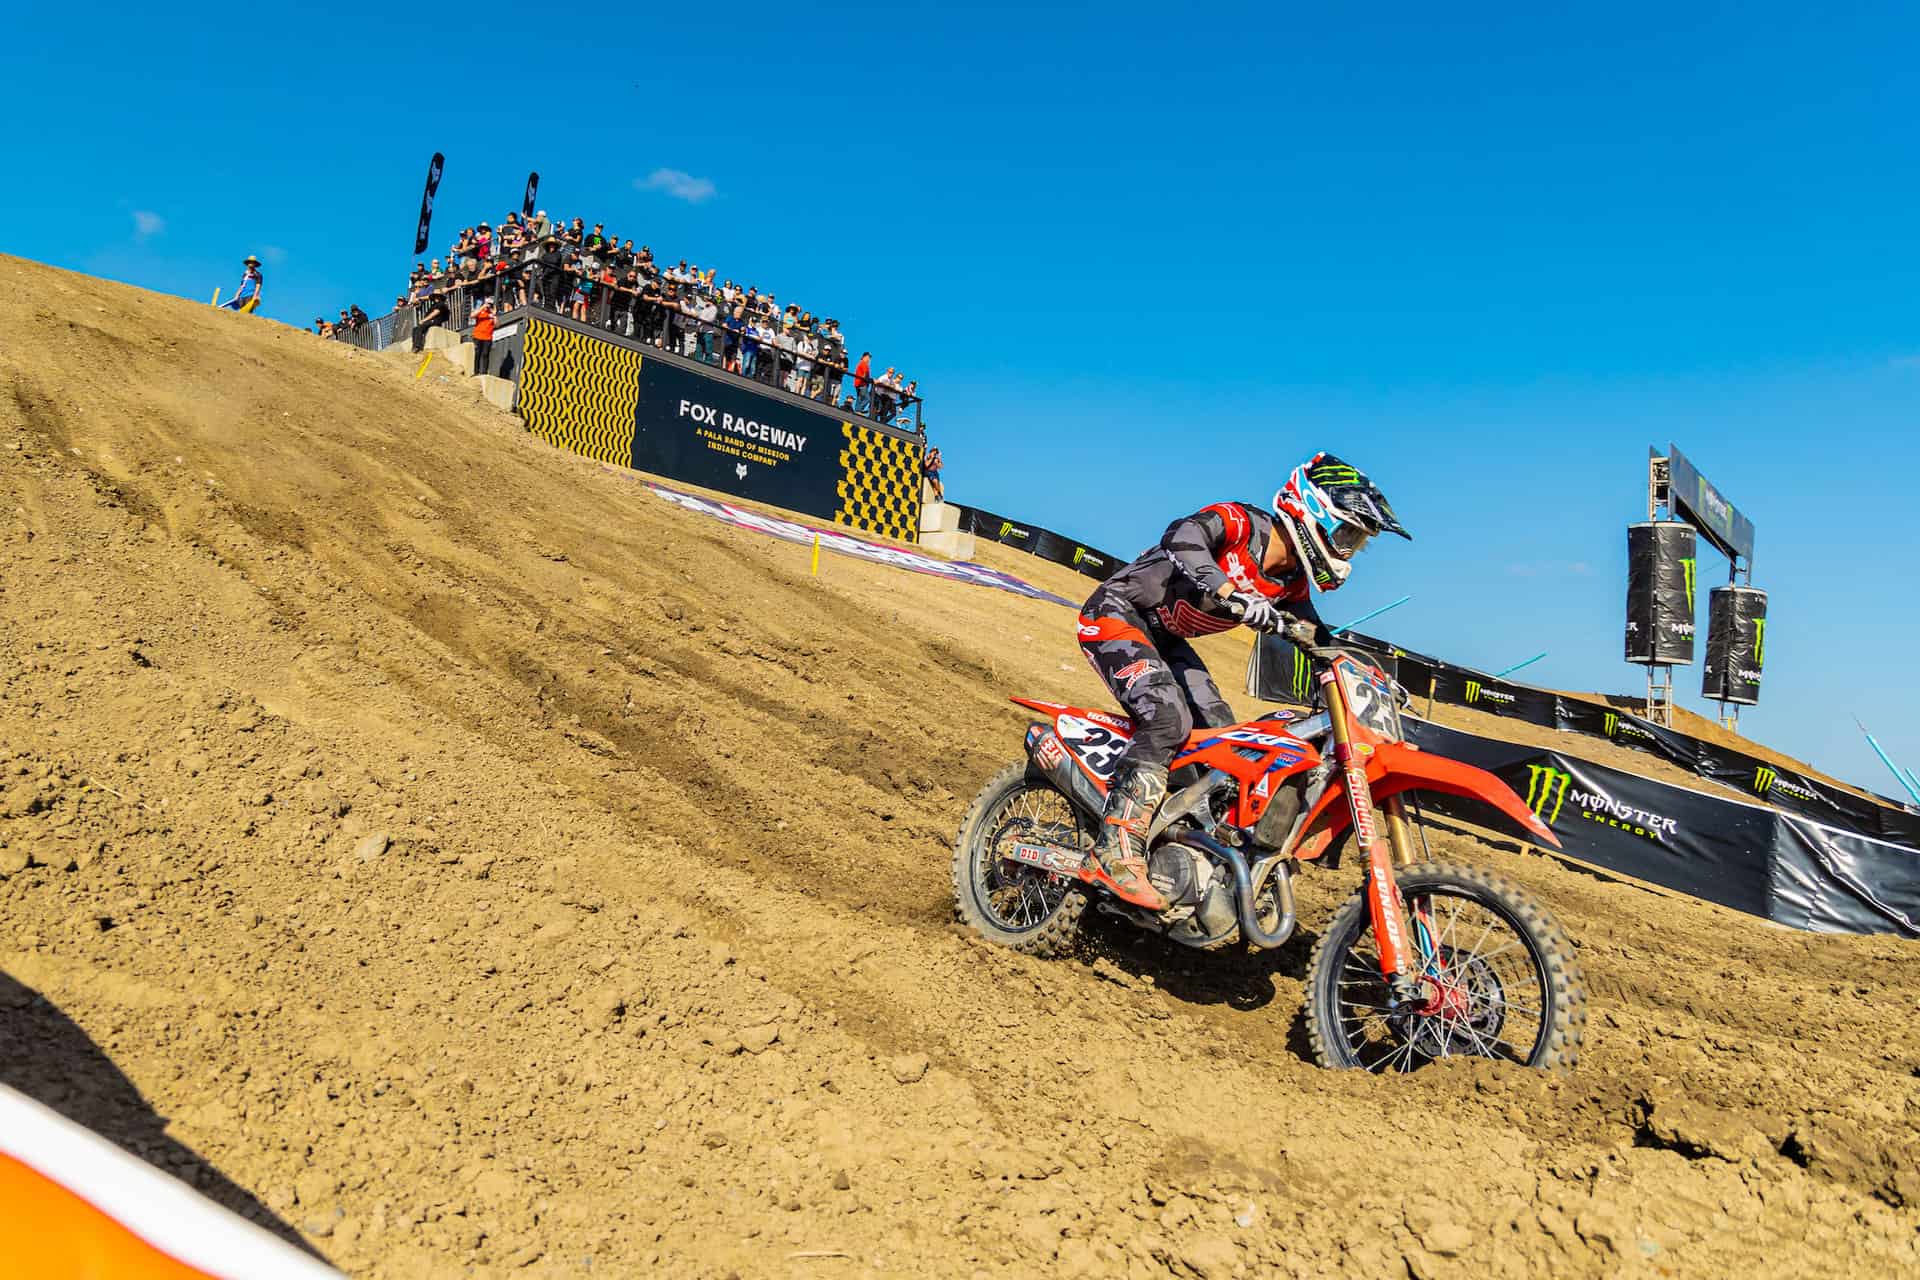 Chase Sexton rides down the hill at Fox Raceway in the first round of the 2023 Motocross Season. Photo by Align Media